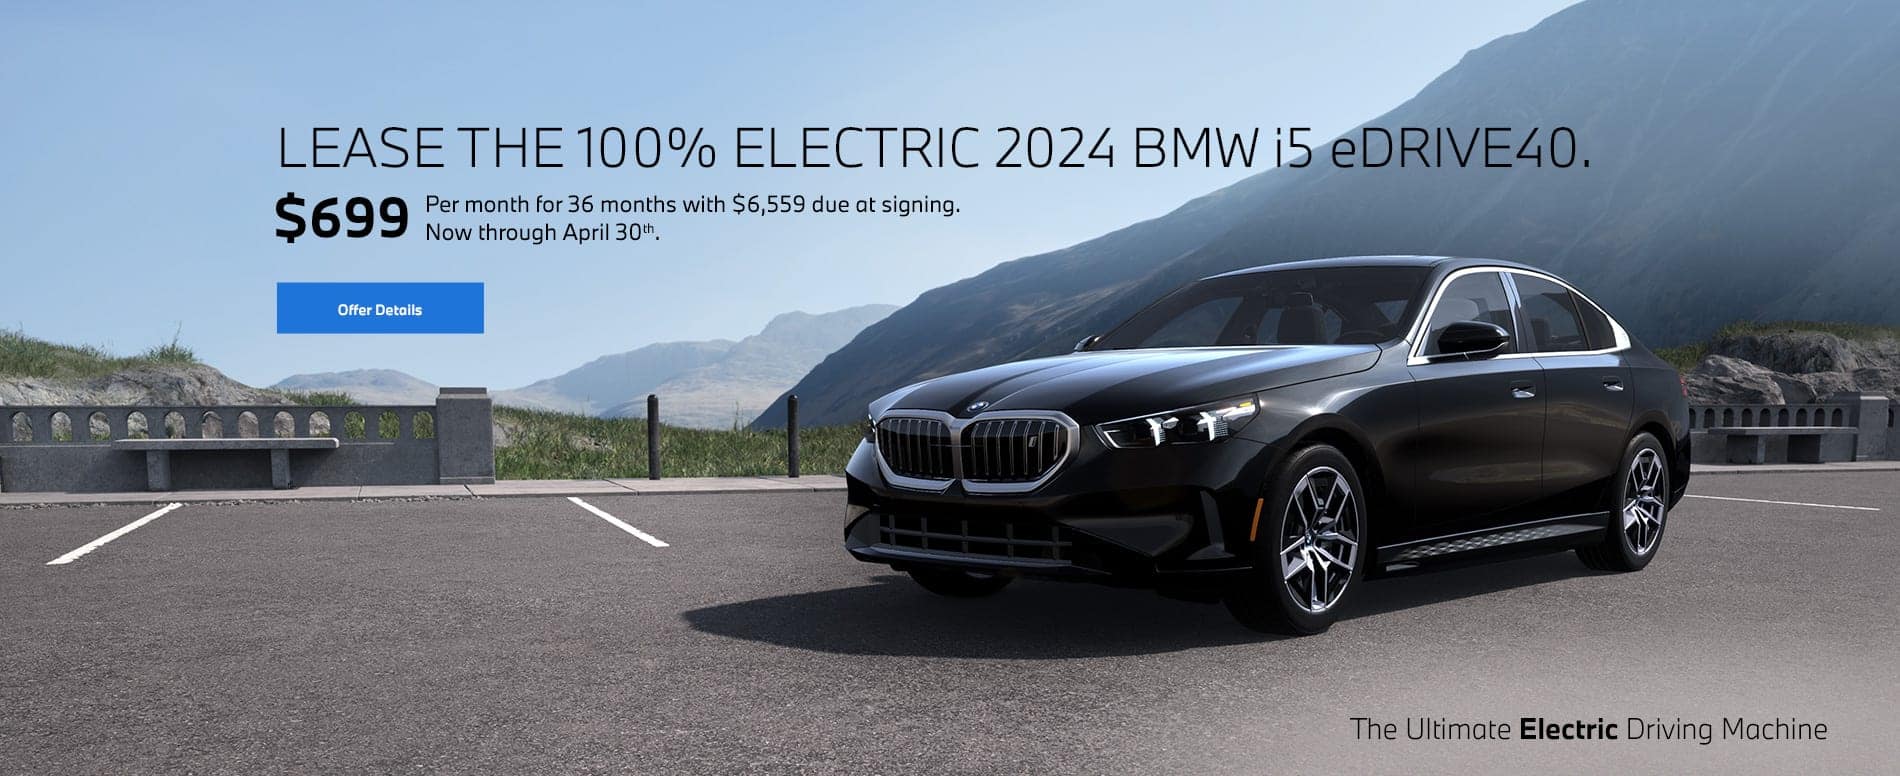 2024 i5 eDrive40 lease starting at $699 per month for 36 months